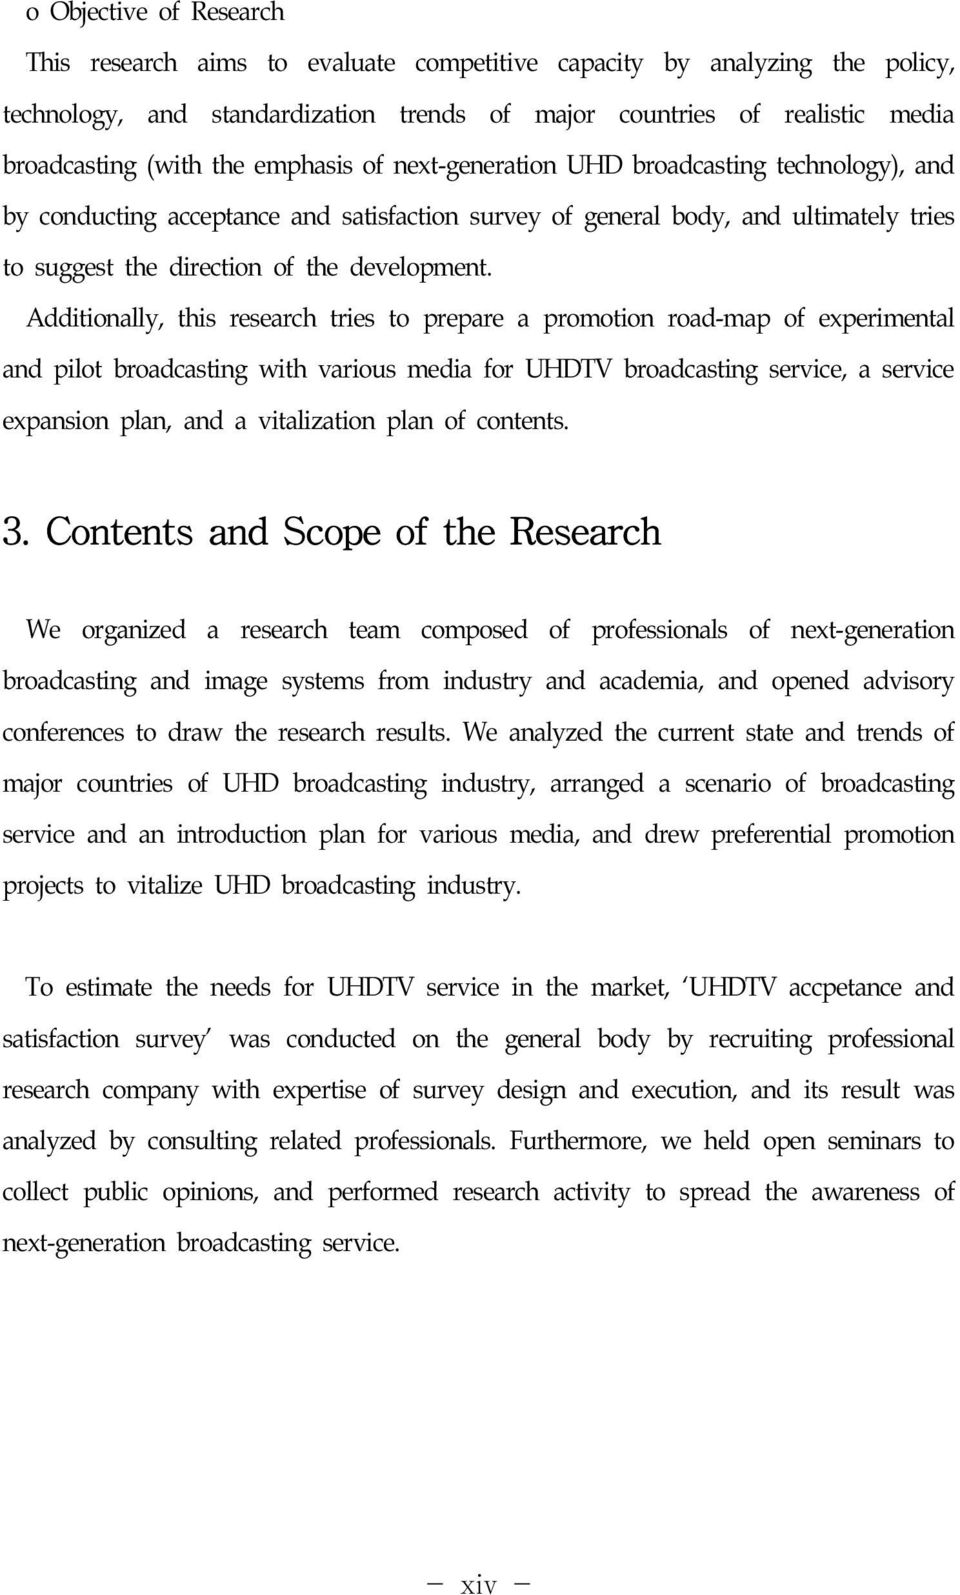 Additionally, this research tries to prepare a promotion road-map of experimental and pilot broadcasting with various media for UHDTV broadcasting service, a service expansion plan, and a